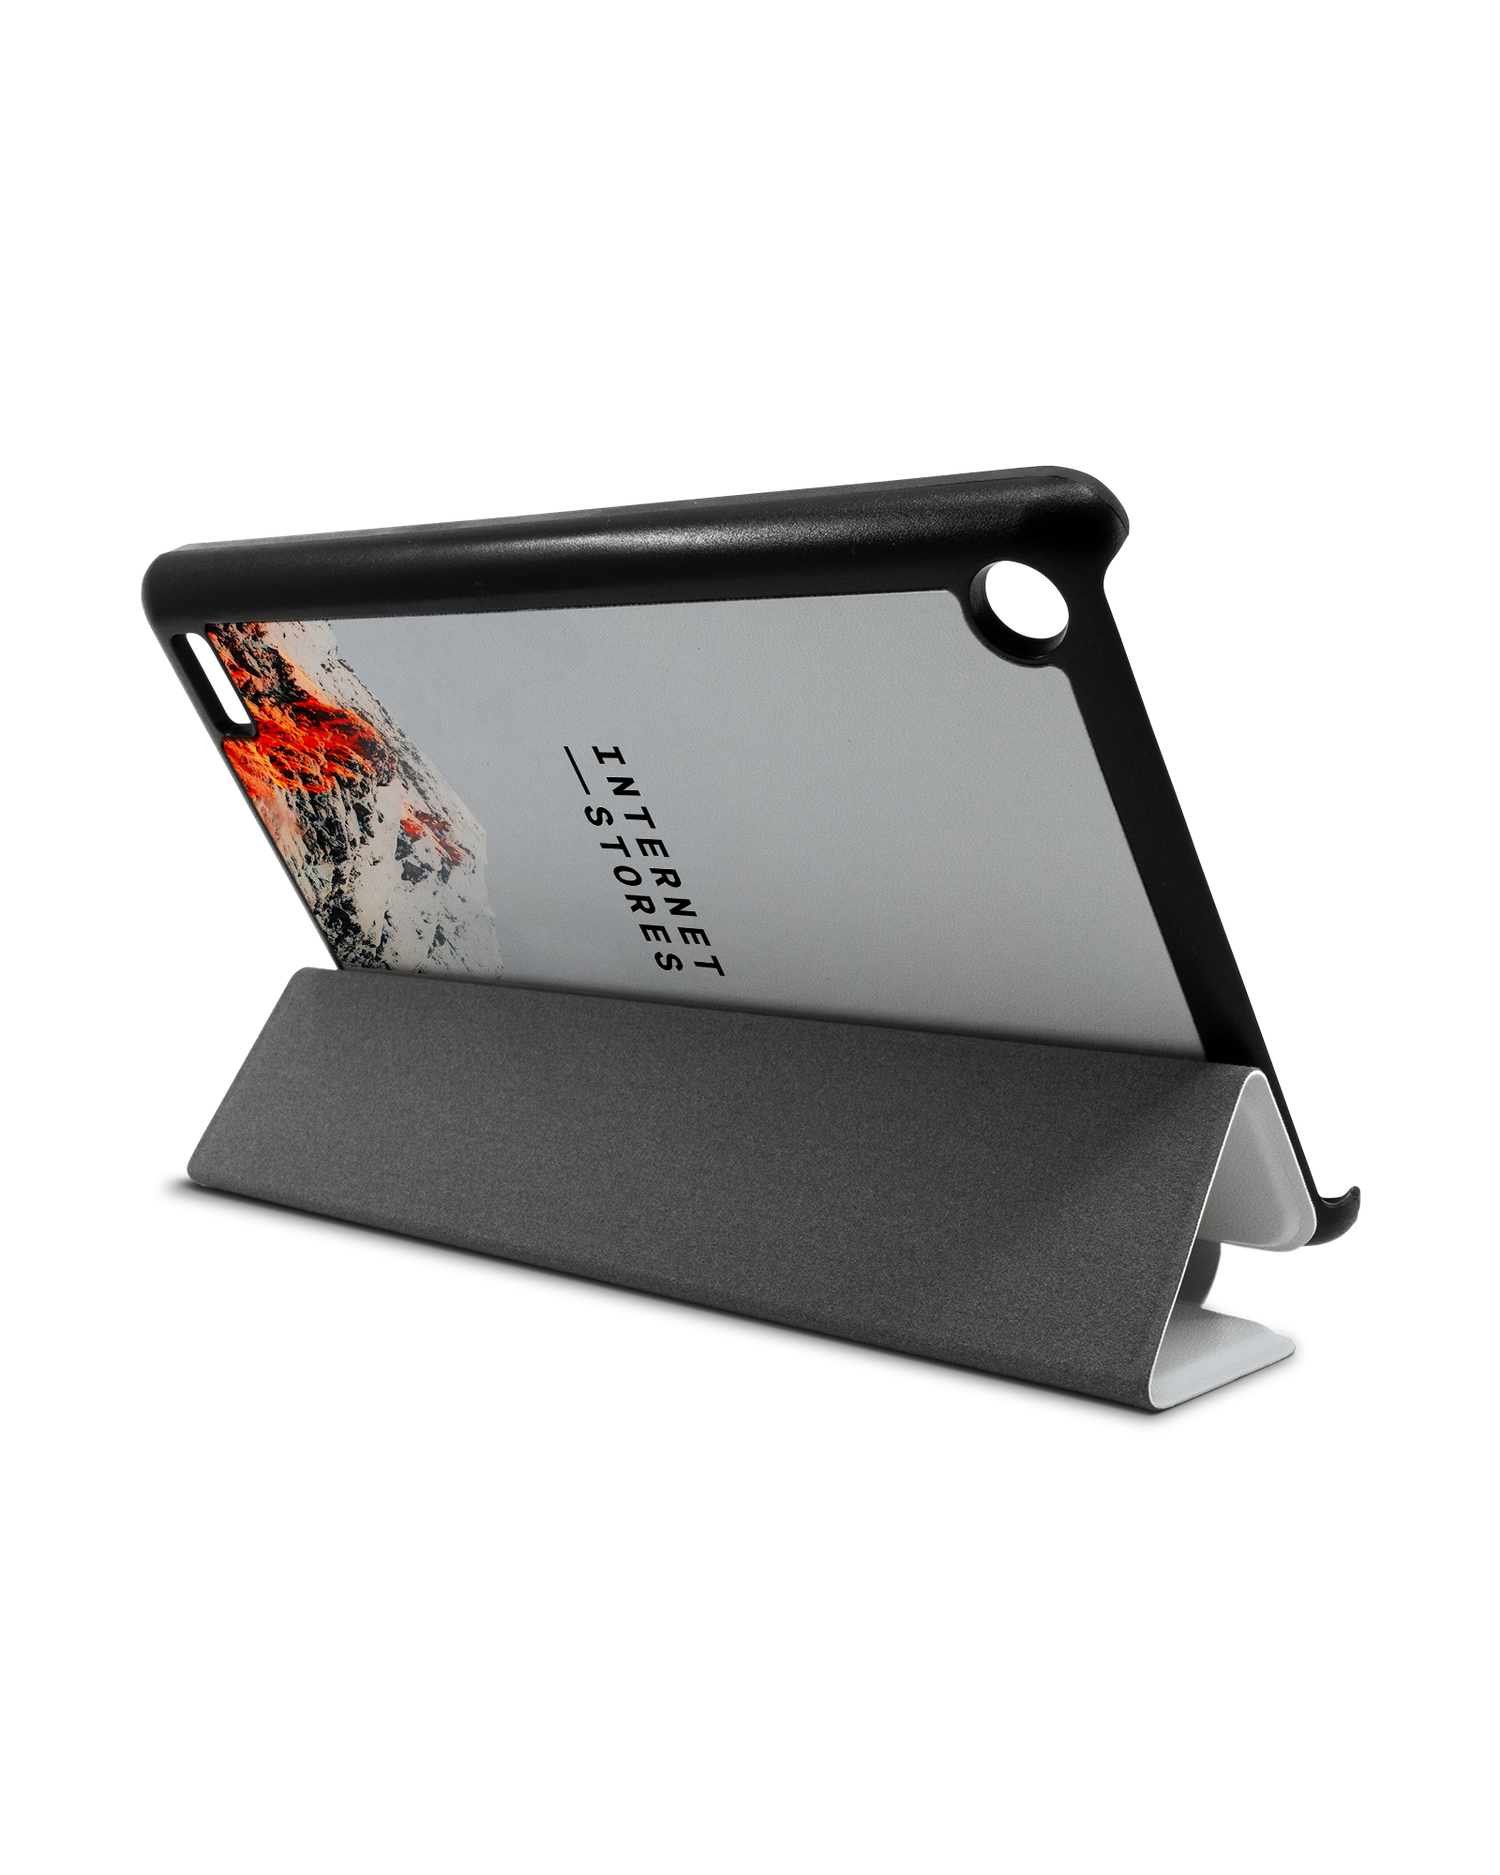 High Peak Tablet Smart Case for Amazon Fire 7: Used as Stand